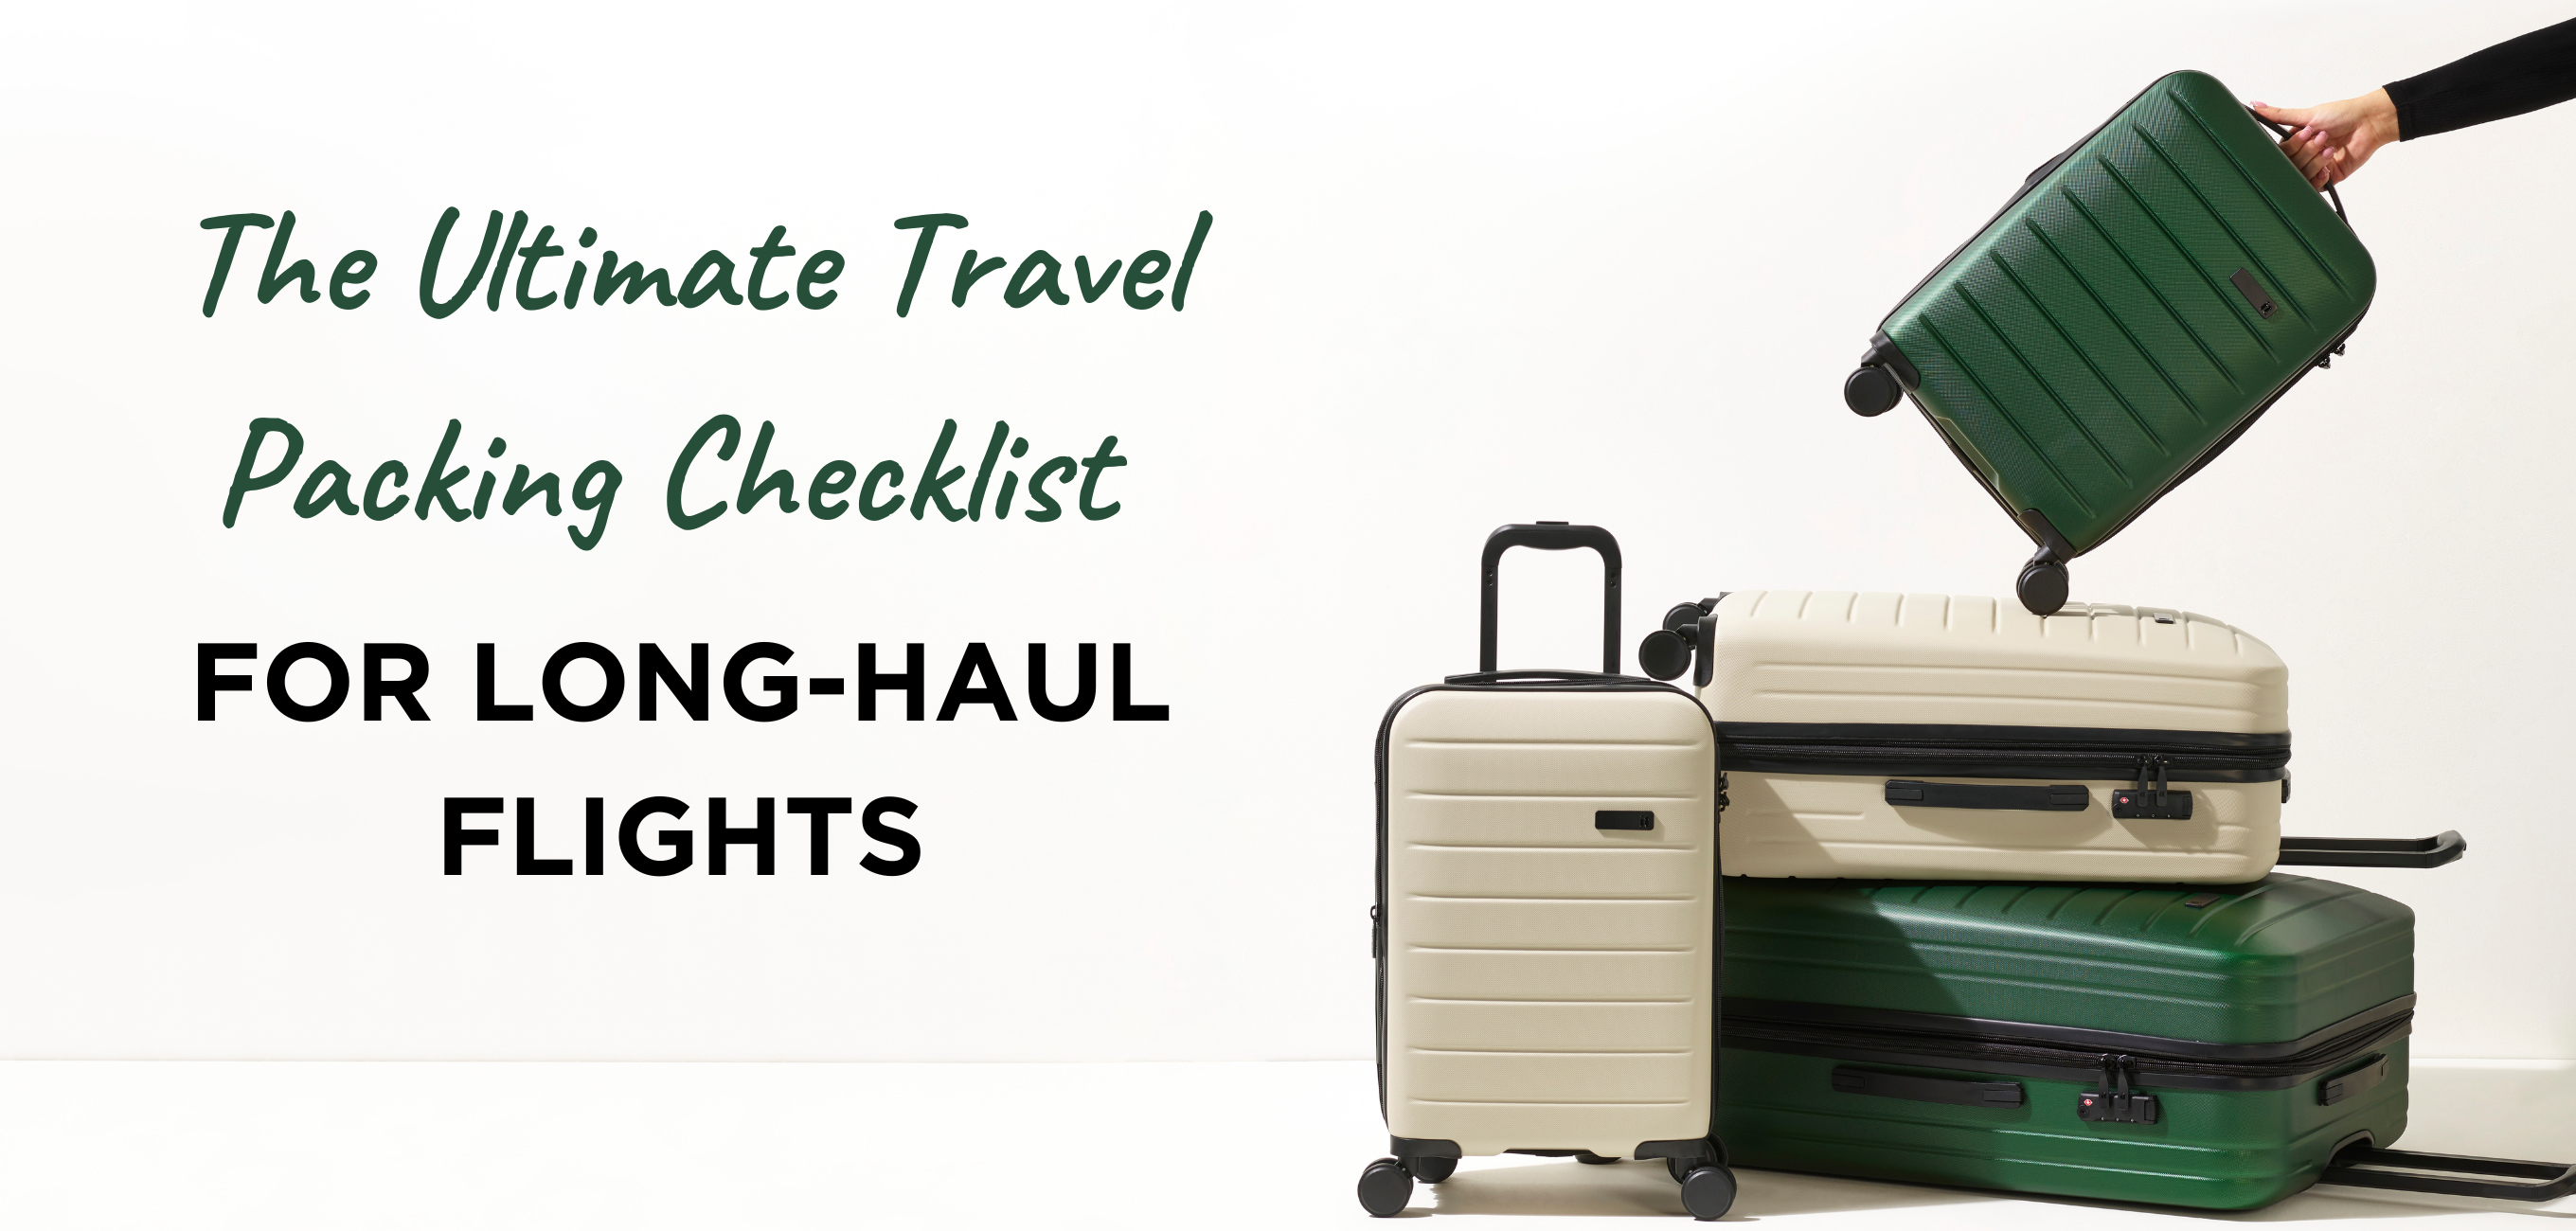 The Ultimate Travel Packing Checklist for Long-Haul Flights